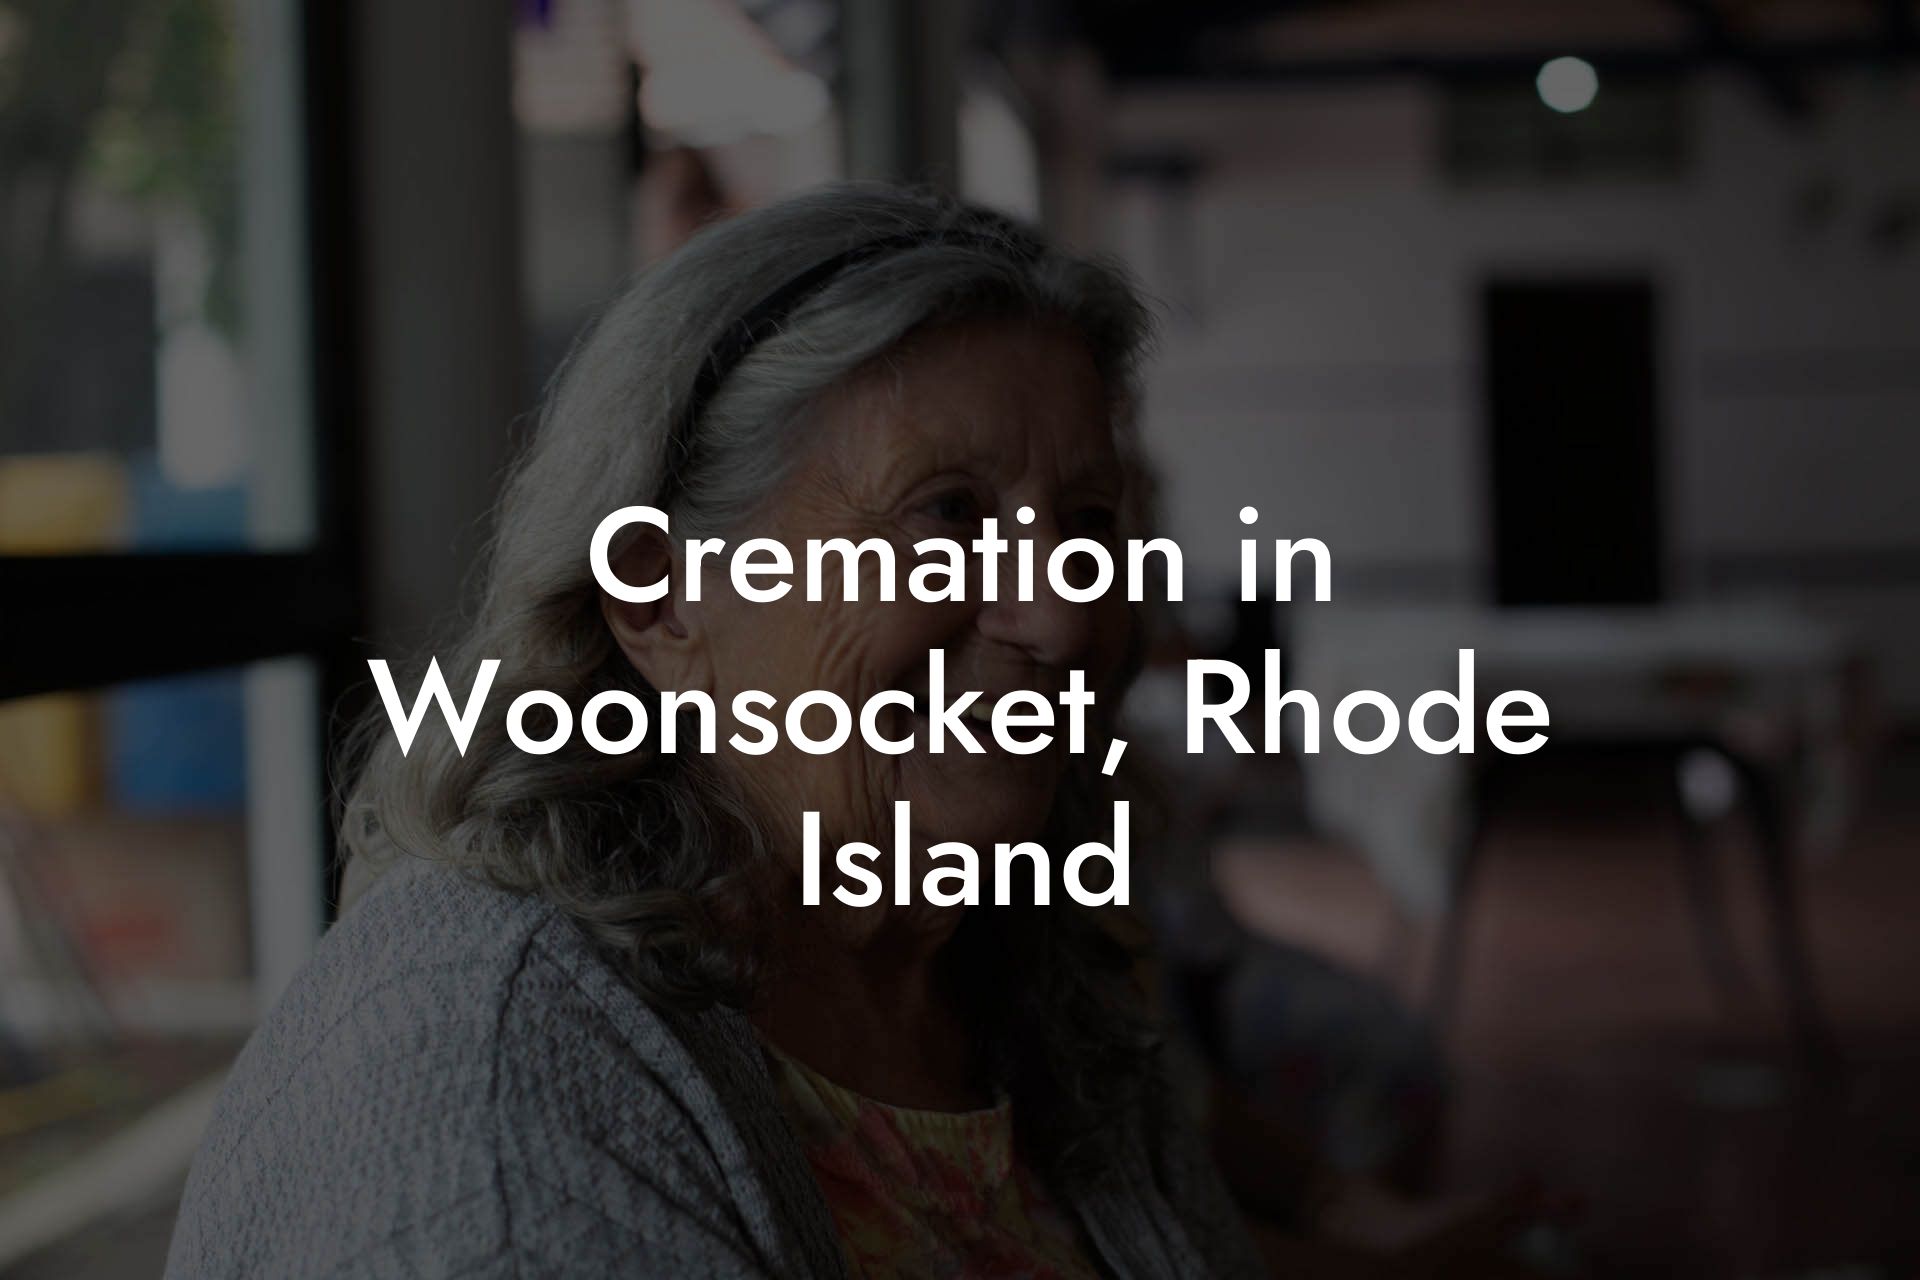 Cremation in Woonsocket, Rhode Island